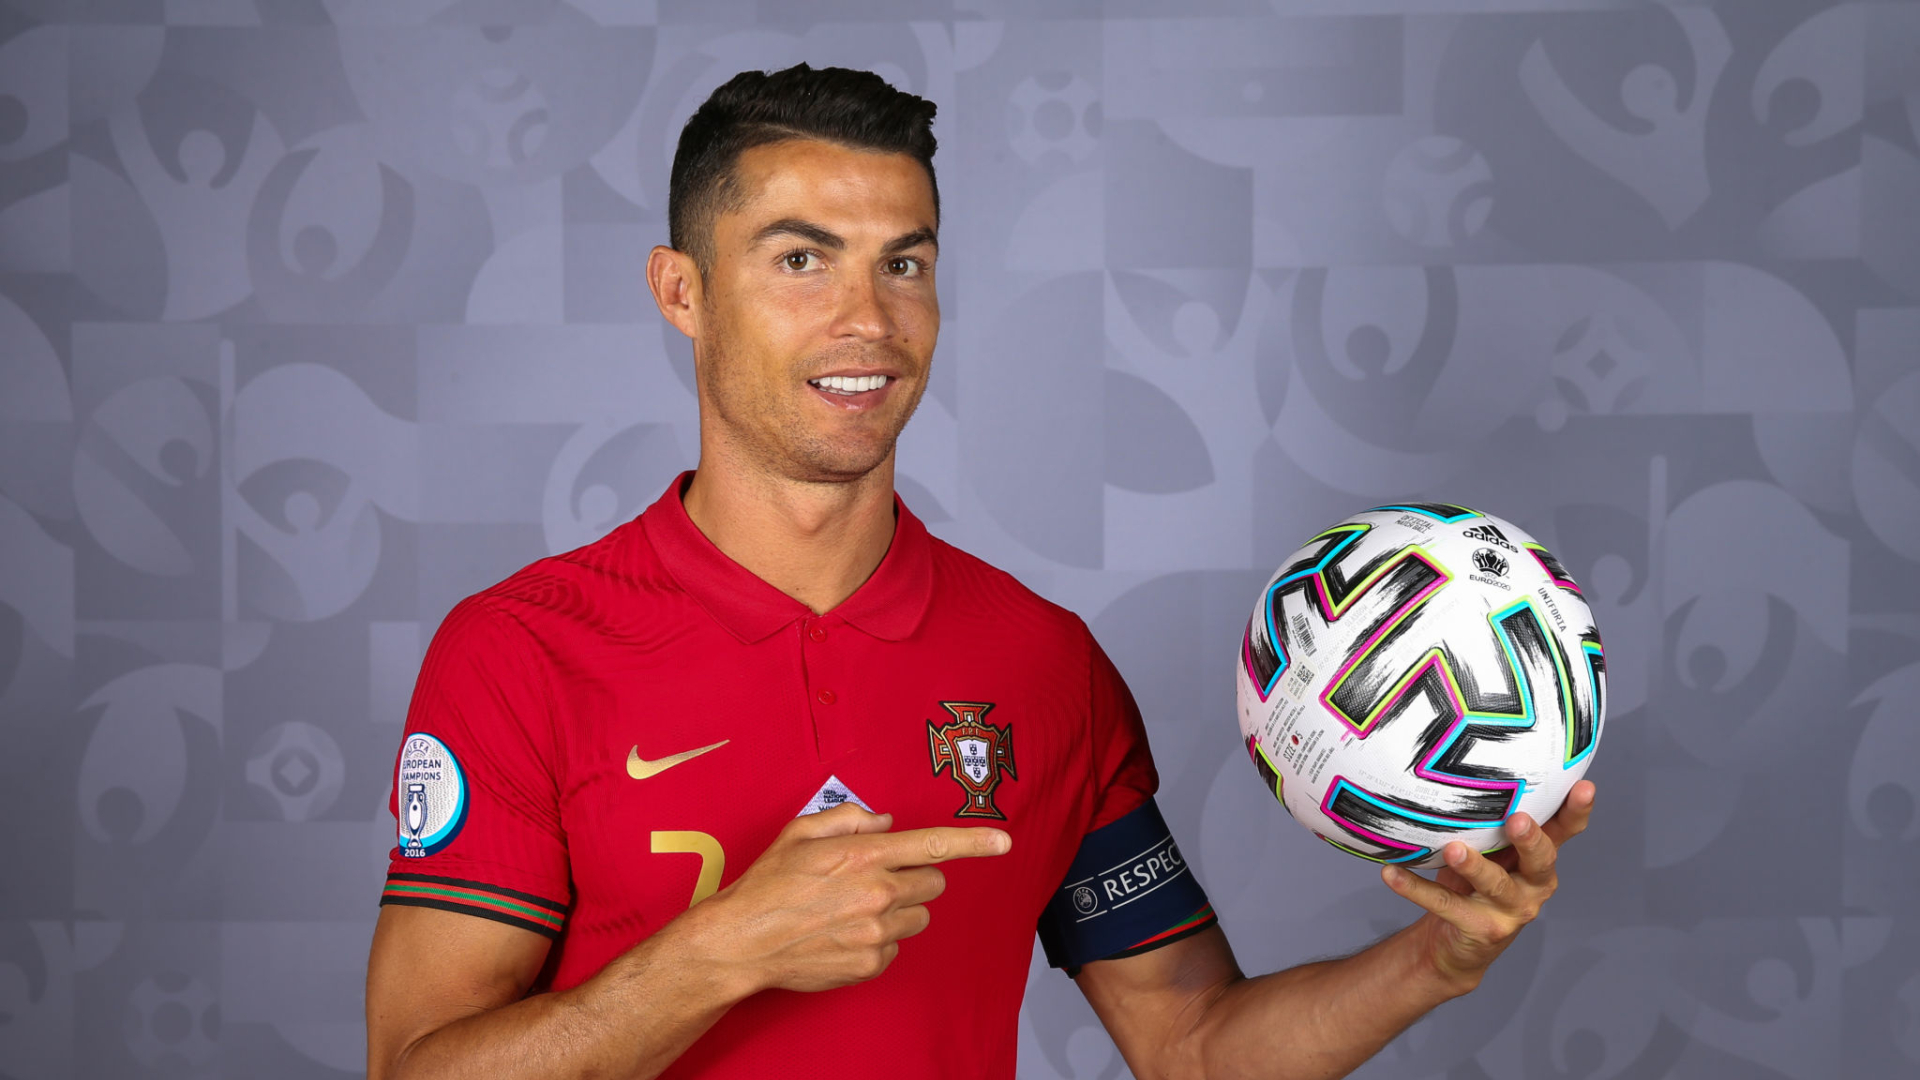 1920x1080 Cristiano Ronaldo HD Photoshoot 1080P Laptop Full HD Wallpaper, HD  Sports 4K Wallpapers, Images, Photos and Background - Wallpapers Den